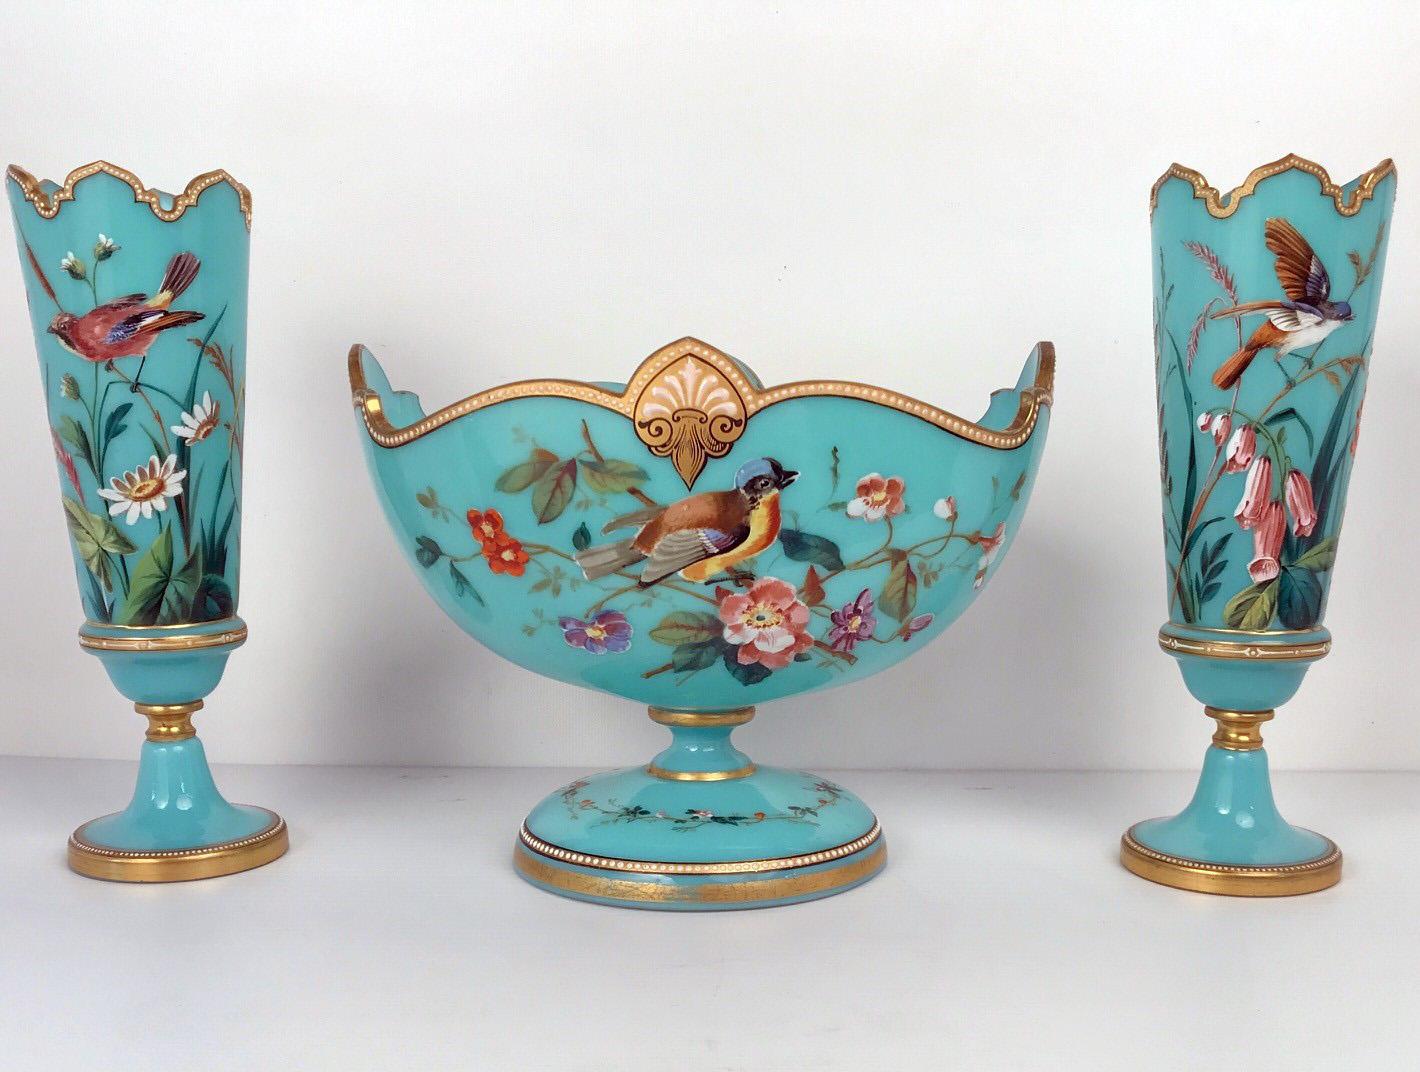 This garniture is painted with birds and flowers on a pale blue ground. The oblong footed bowl has a shaped gilt rim ,with white jewelling and centering palmettes. The flanking vases have crenellated rims and decoration that match the central